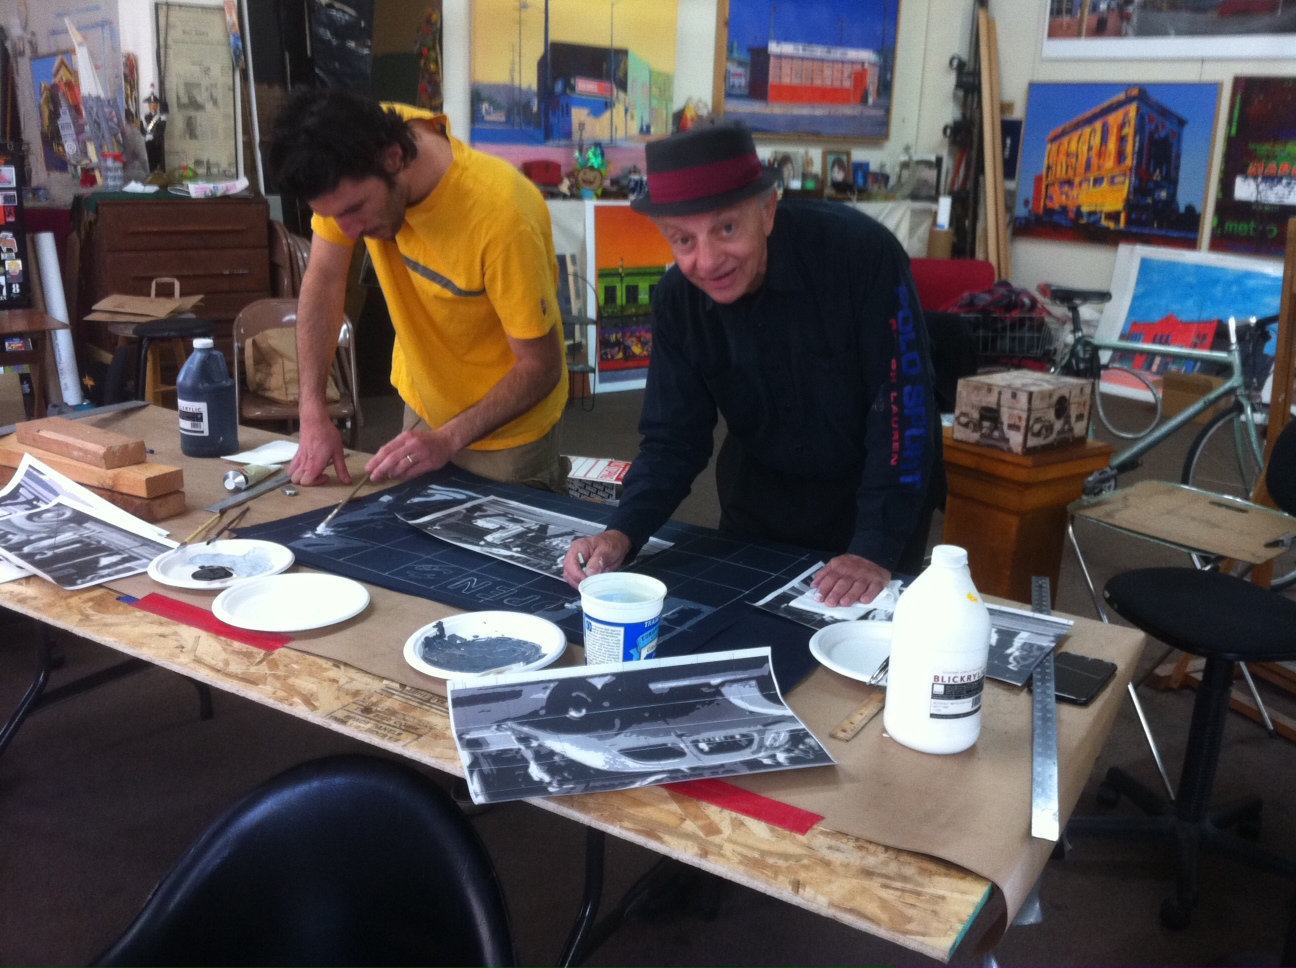 Richard and Francesco prepare another mural...